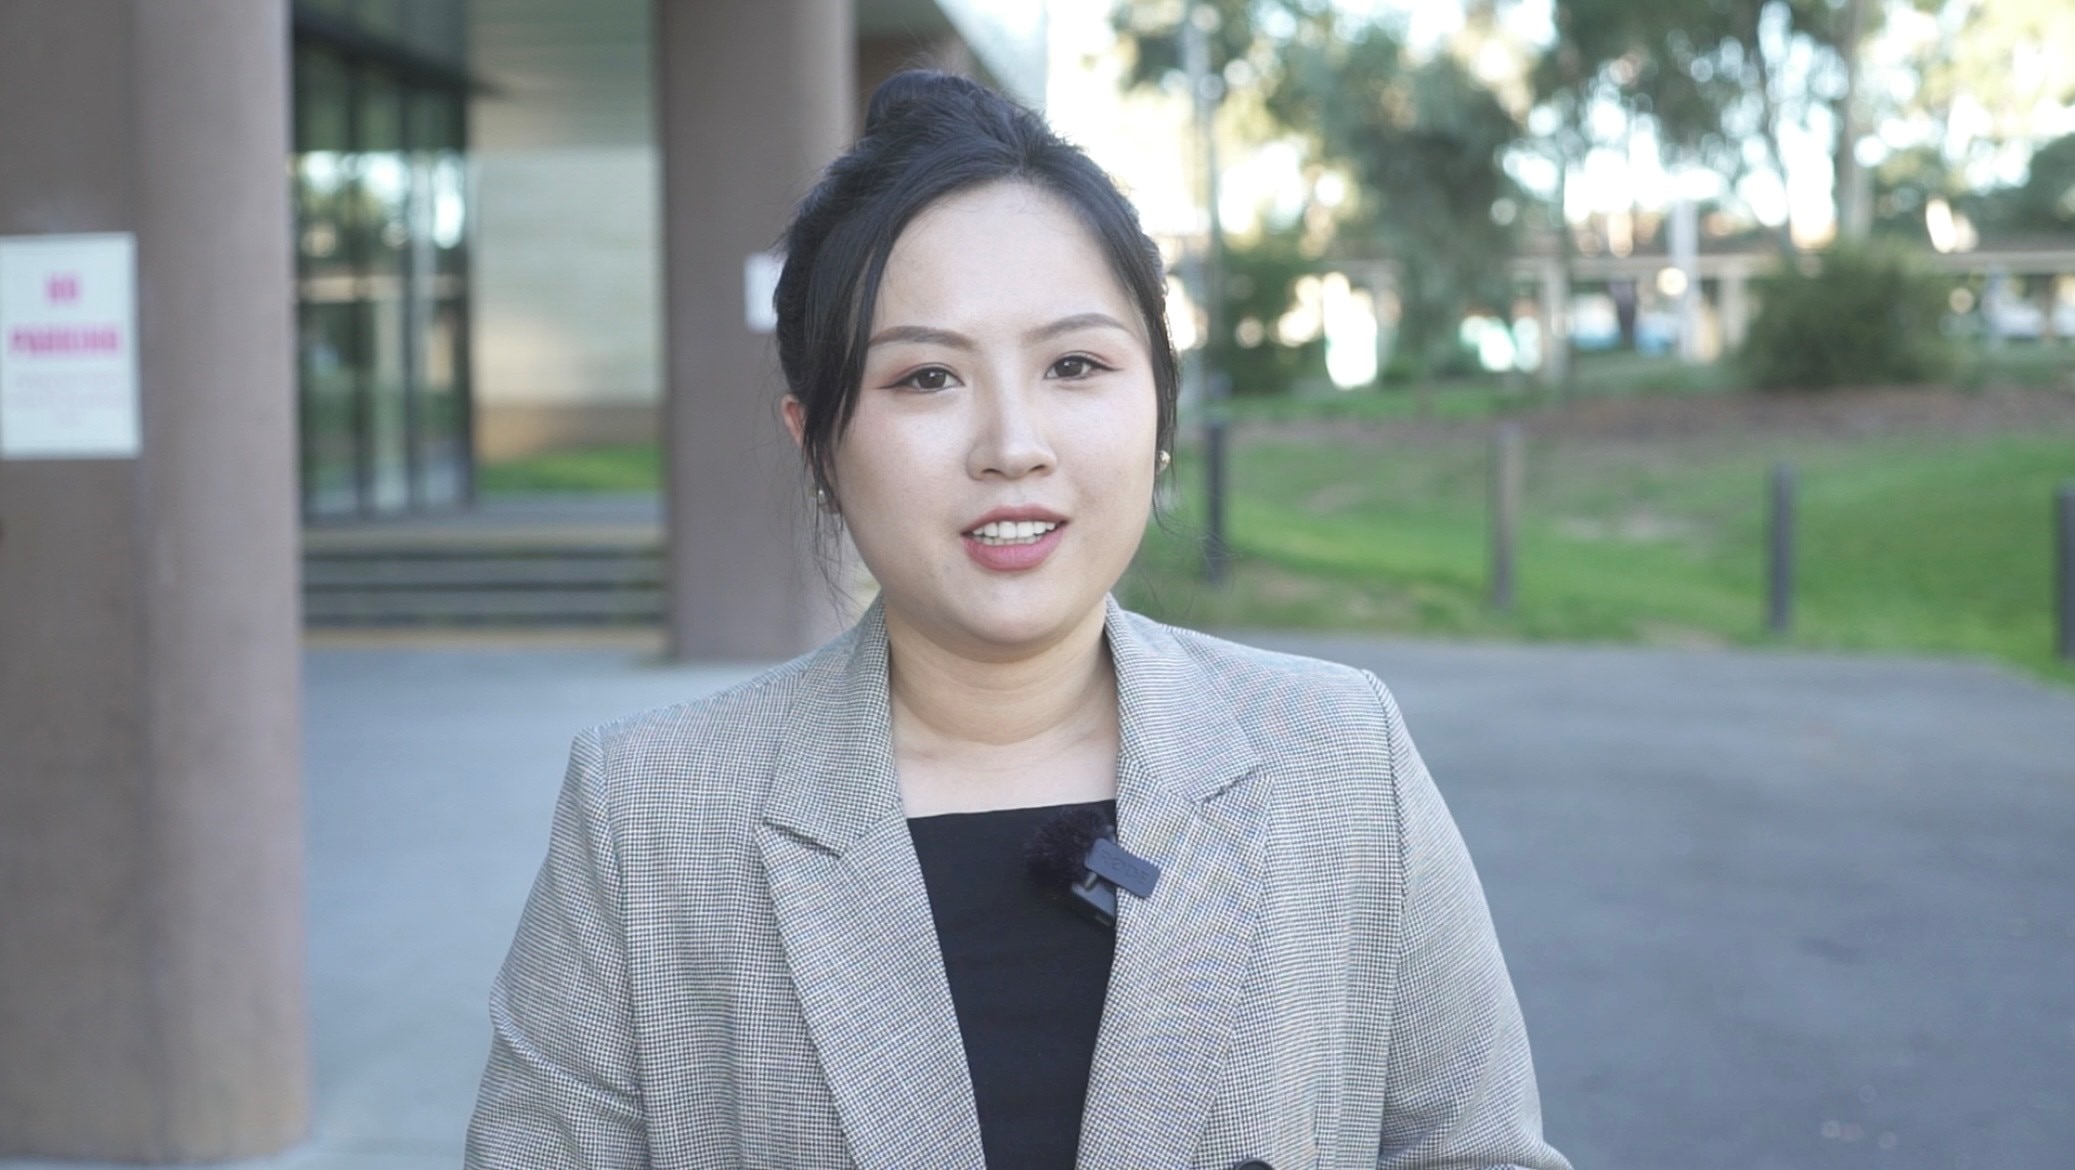 Canberran Shengnan Yao says she's casting her vote based on housing affordability. 